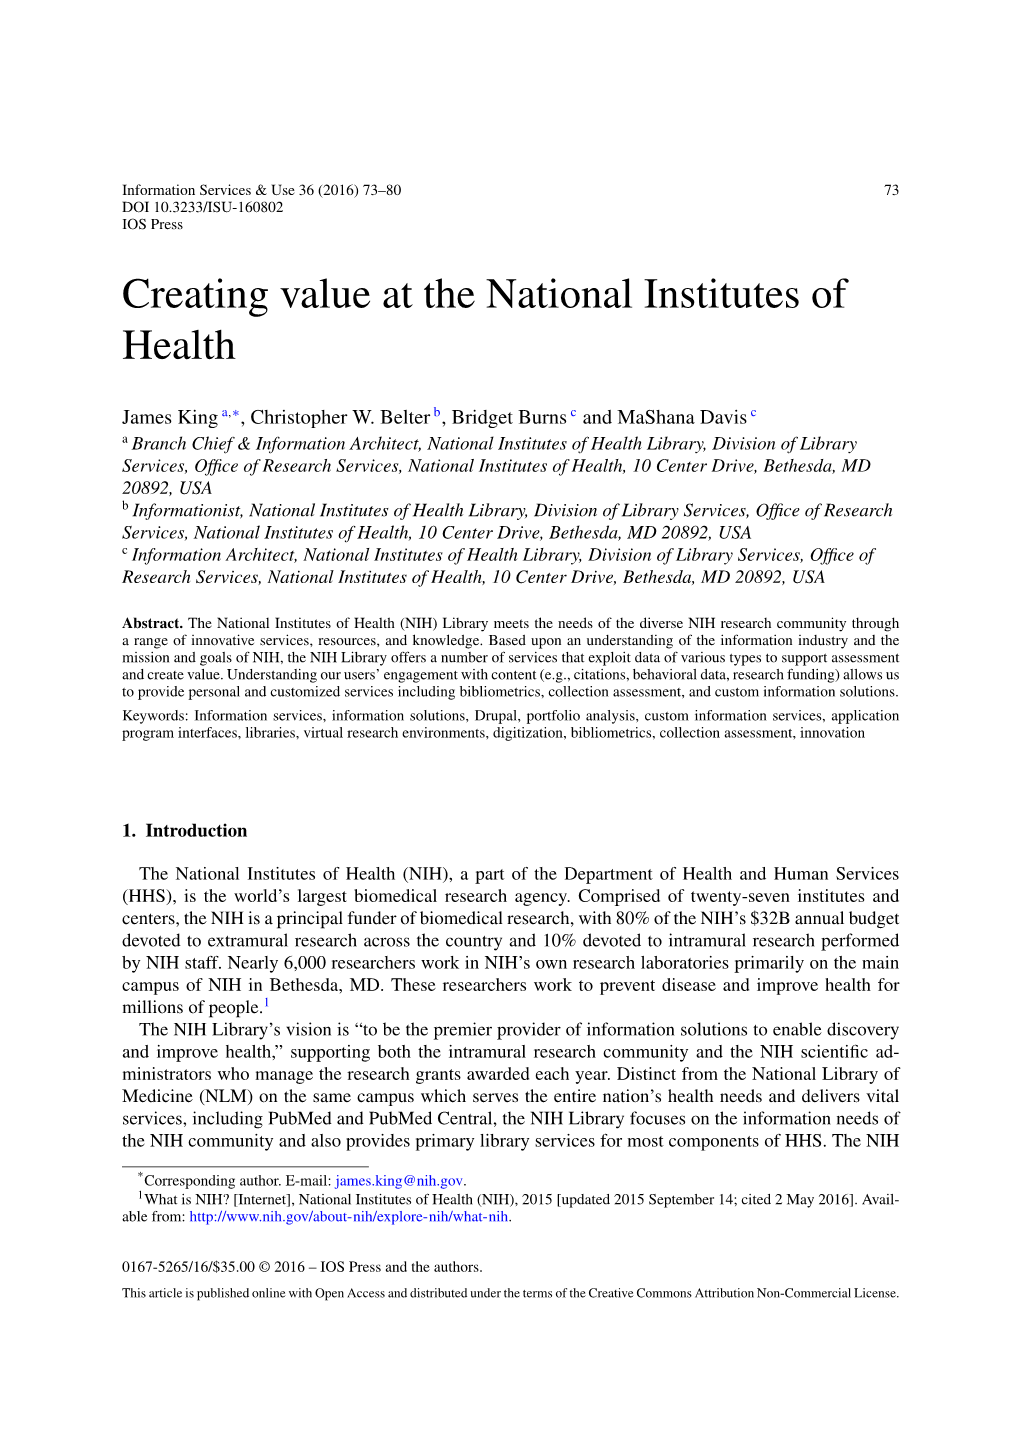 Creating Value at the National Institutes of Health